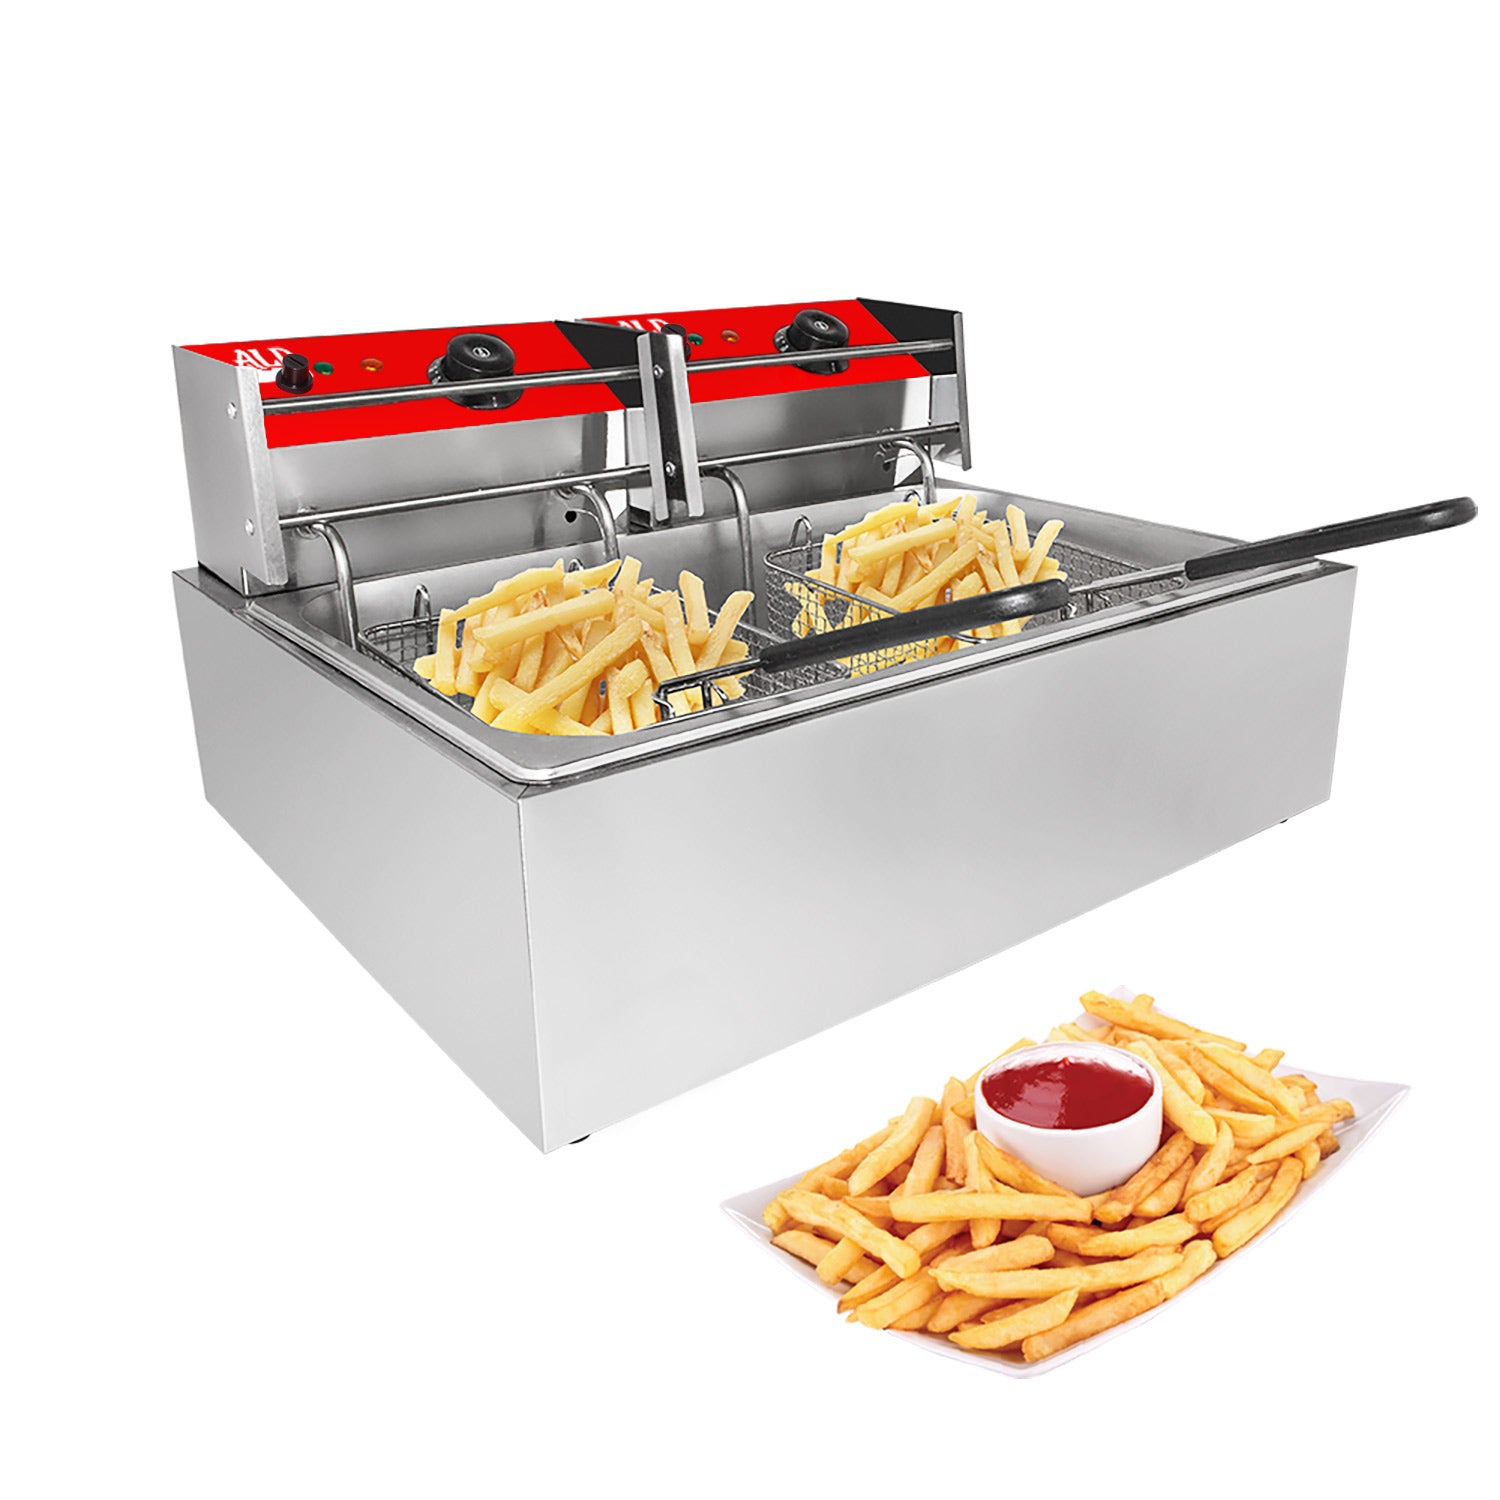 2500Wx2 10Lx2 DULONG Commercial Electric Deep Fryer with Temperature Control Large Countertop Stainless Steel Double Basket Deep Fryer French Fries Restaurant Home Kitchen 